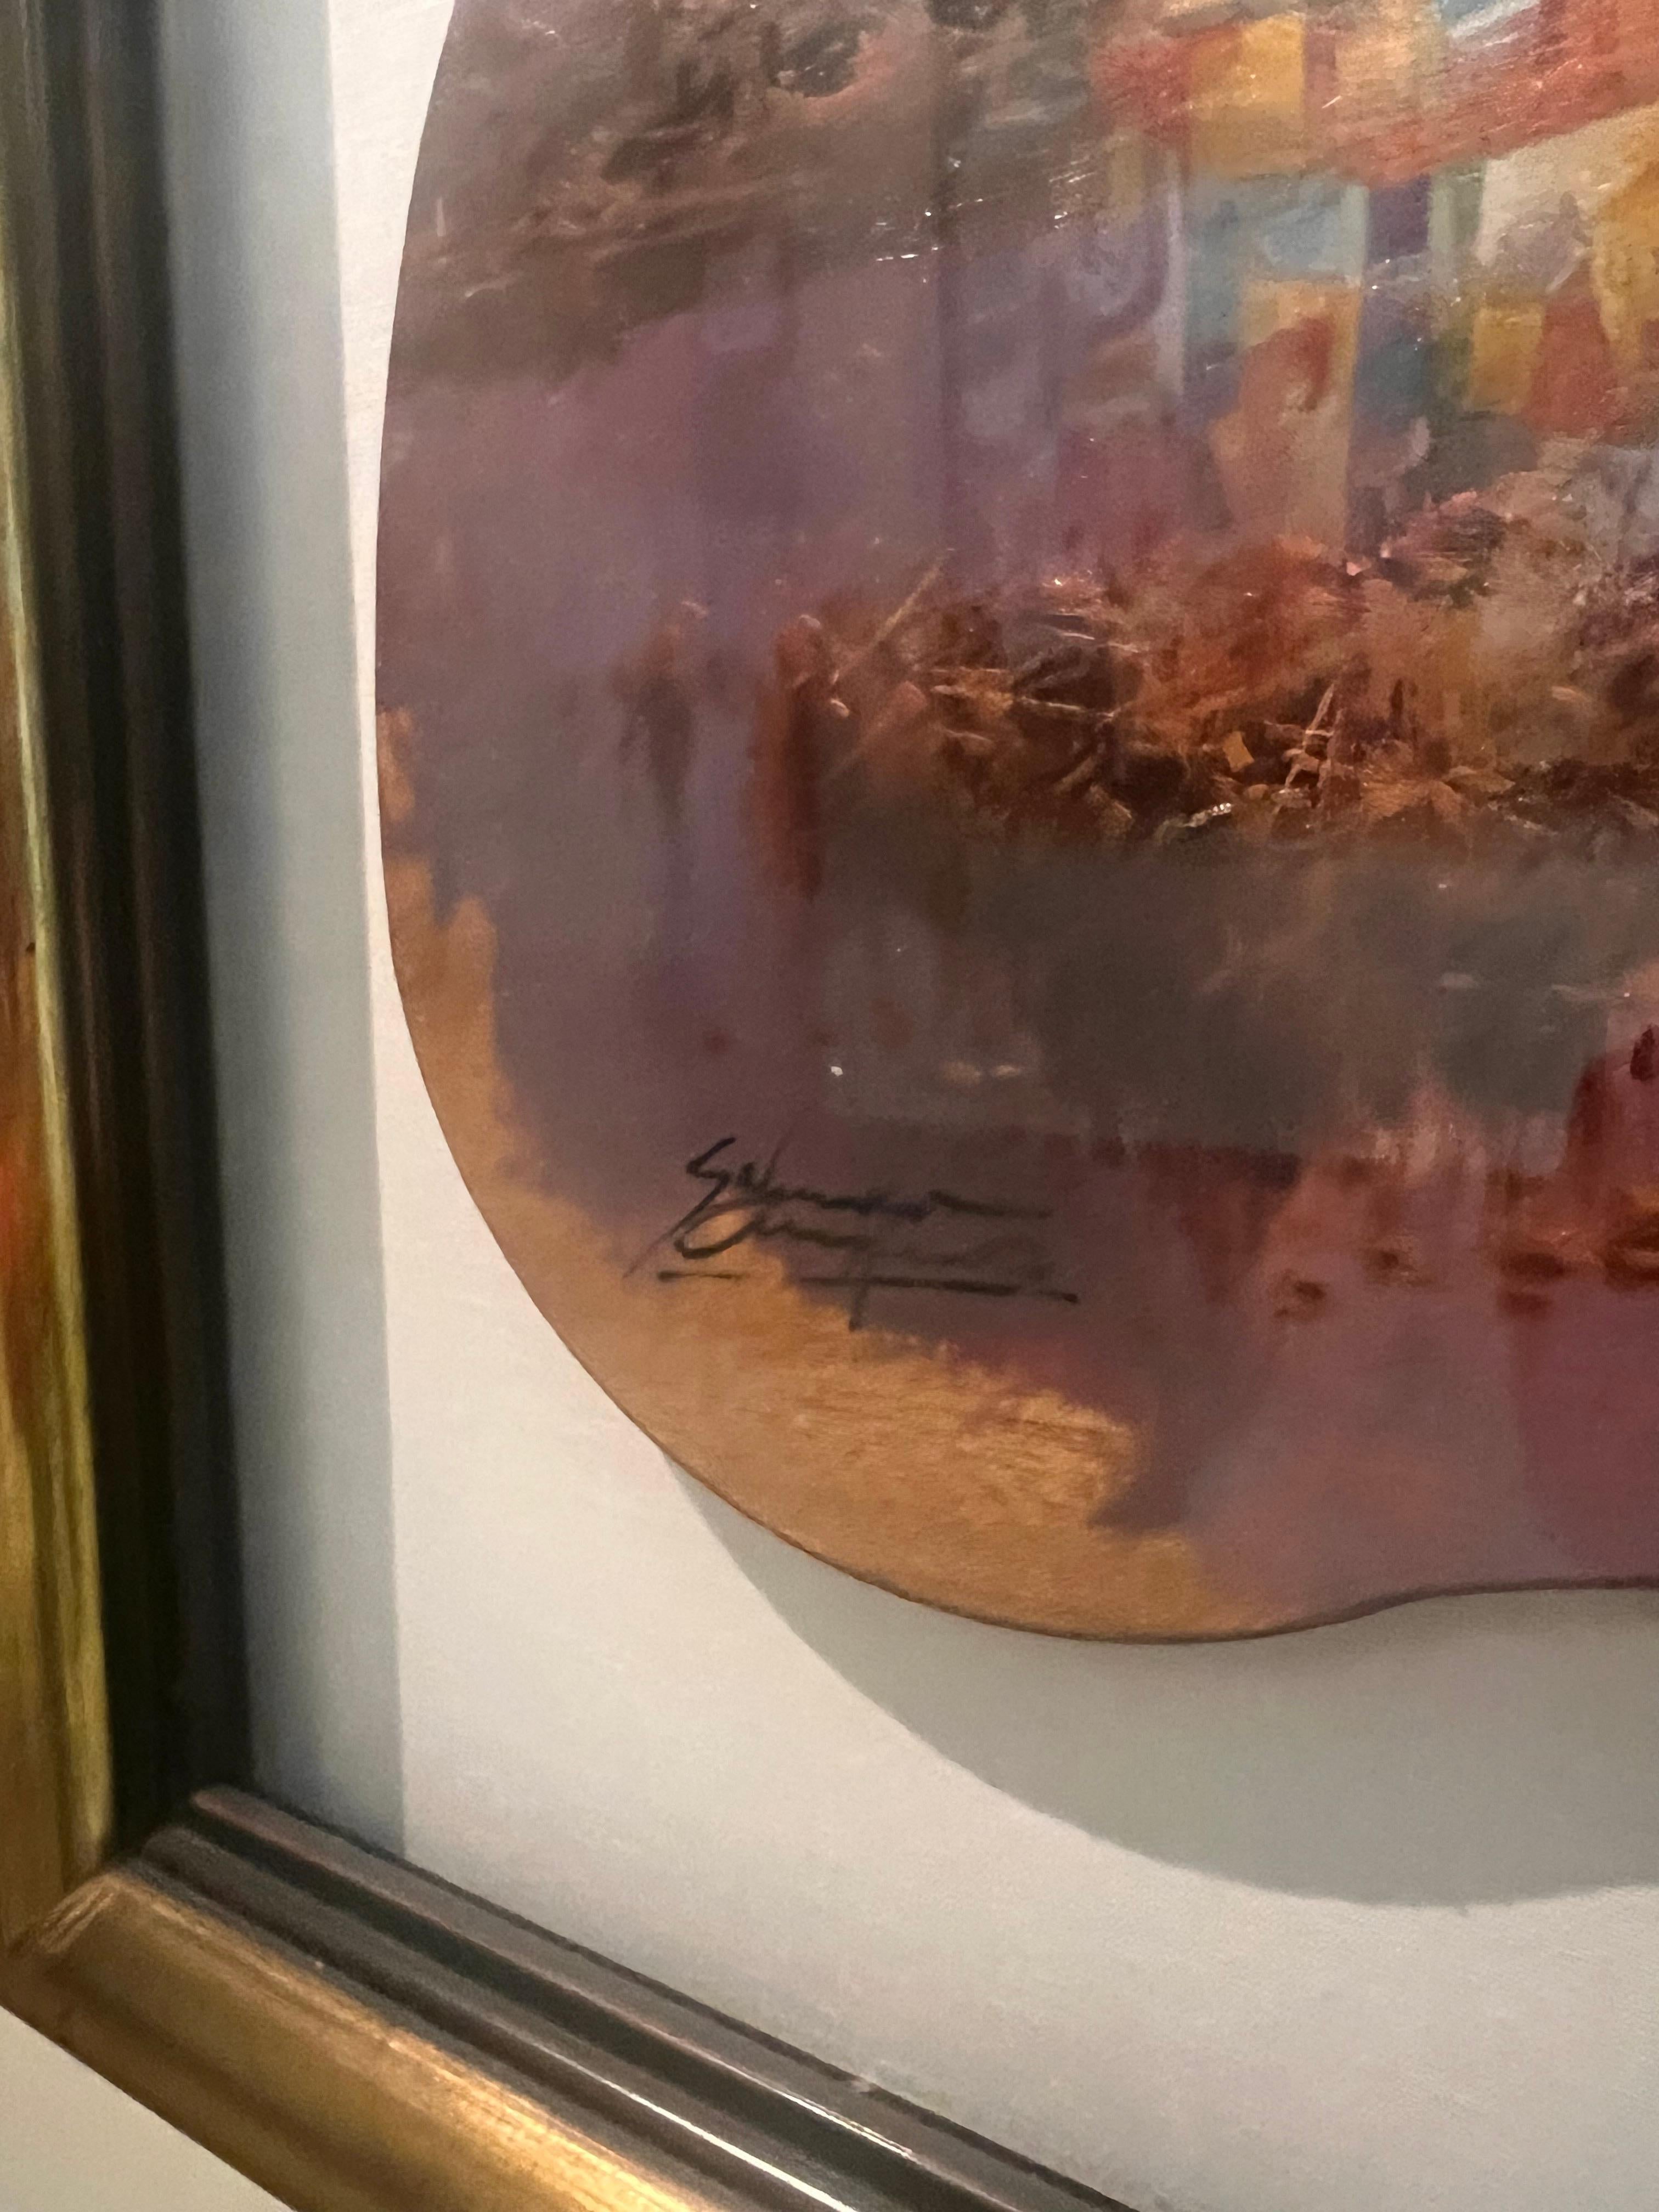 This painting is in excellent condition.  Unique, painted on an artist palette.

Salvador Caballero, (1943 - 2006) was one of many self-taught painters of whom it could be said that painting was in his blood.
In studying the work and life of